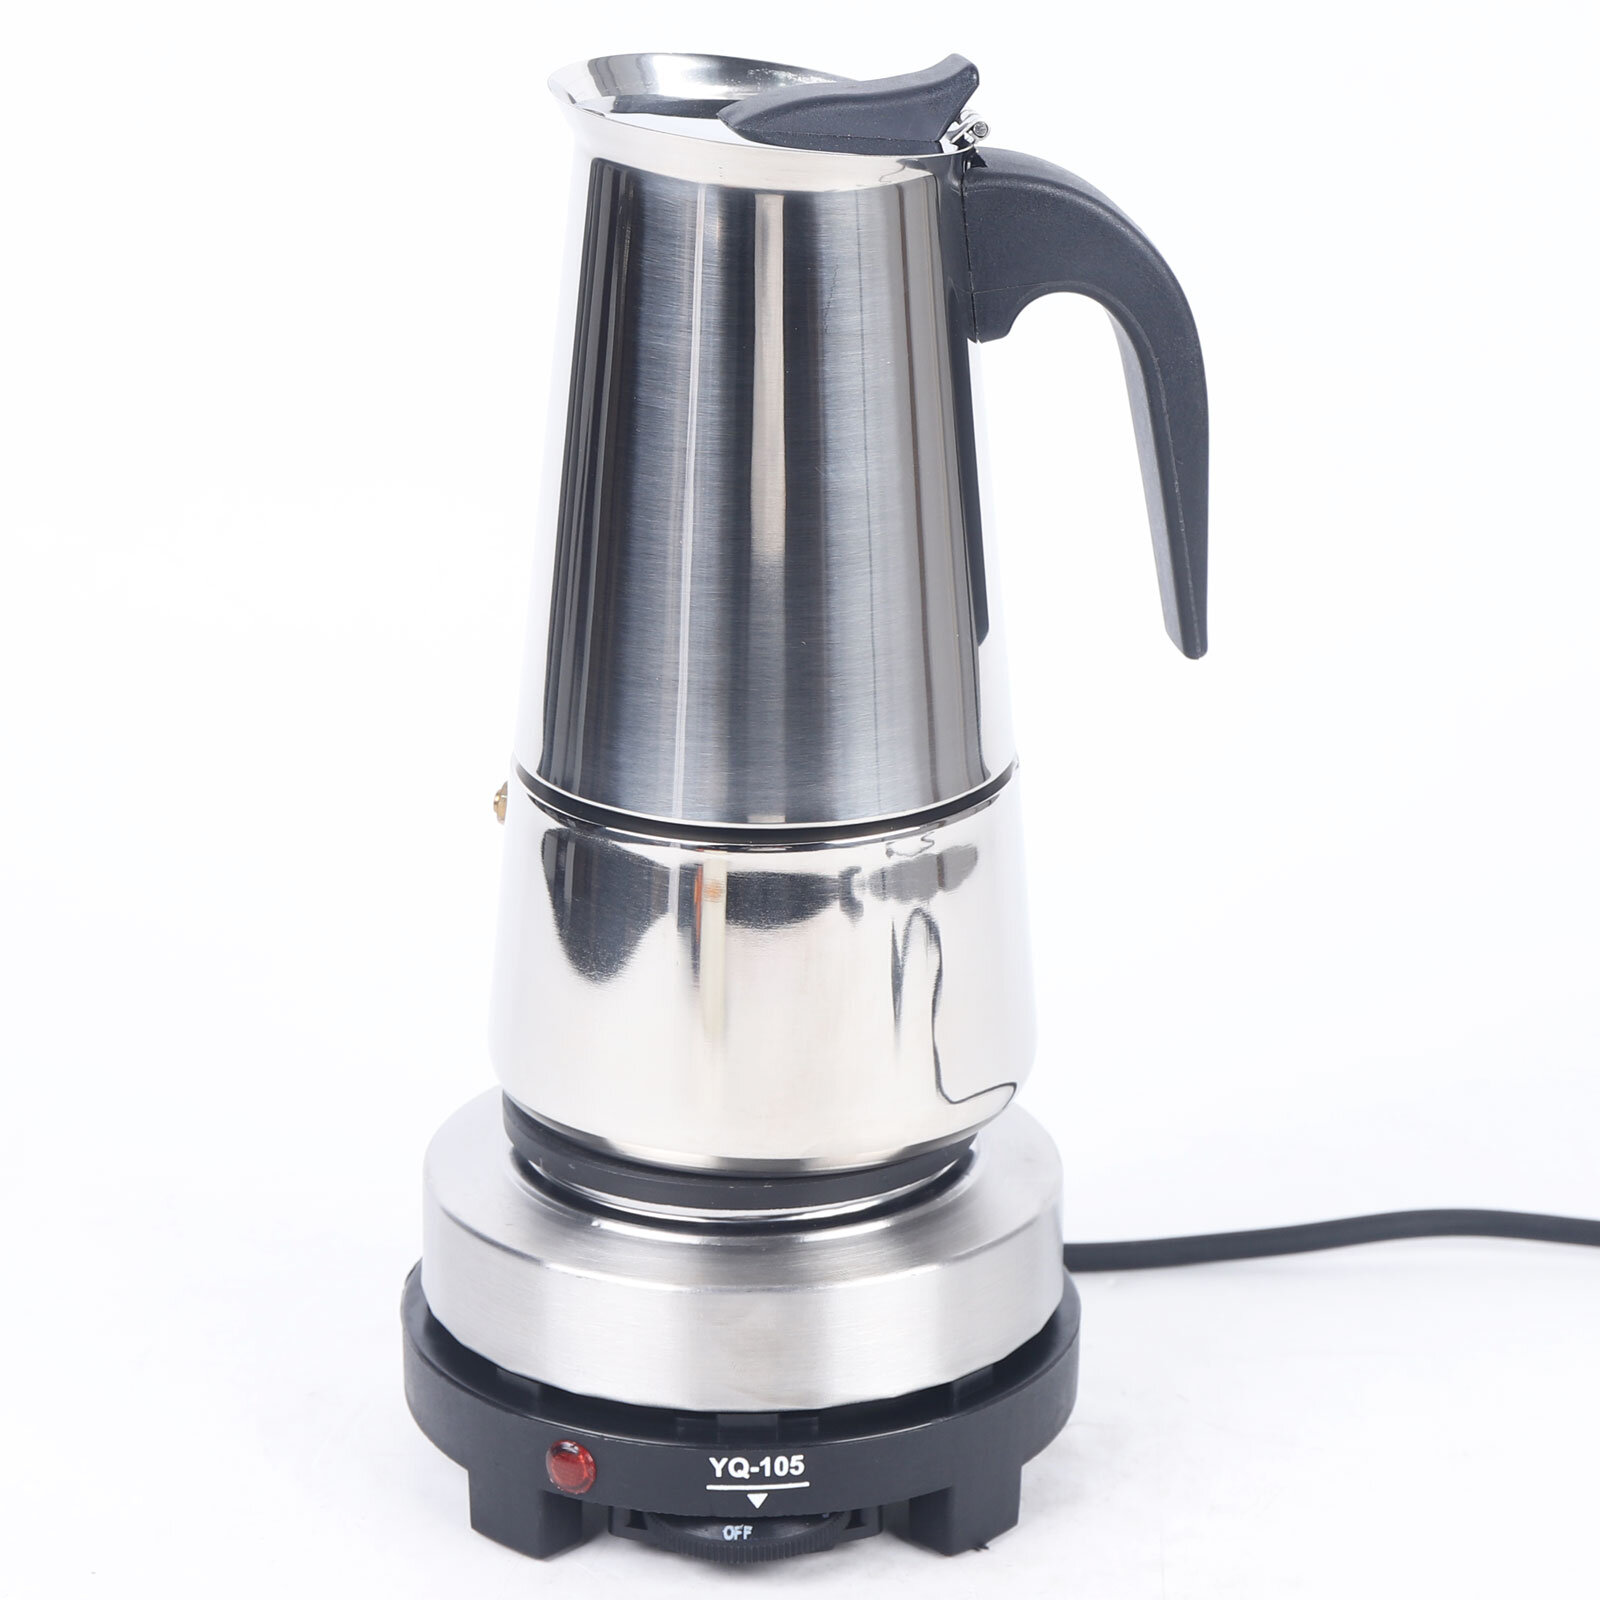 Bialetti Moka Express (6-Cup) Review - Specs, Capacity, Brew Time + More 